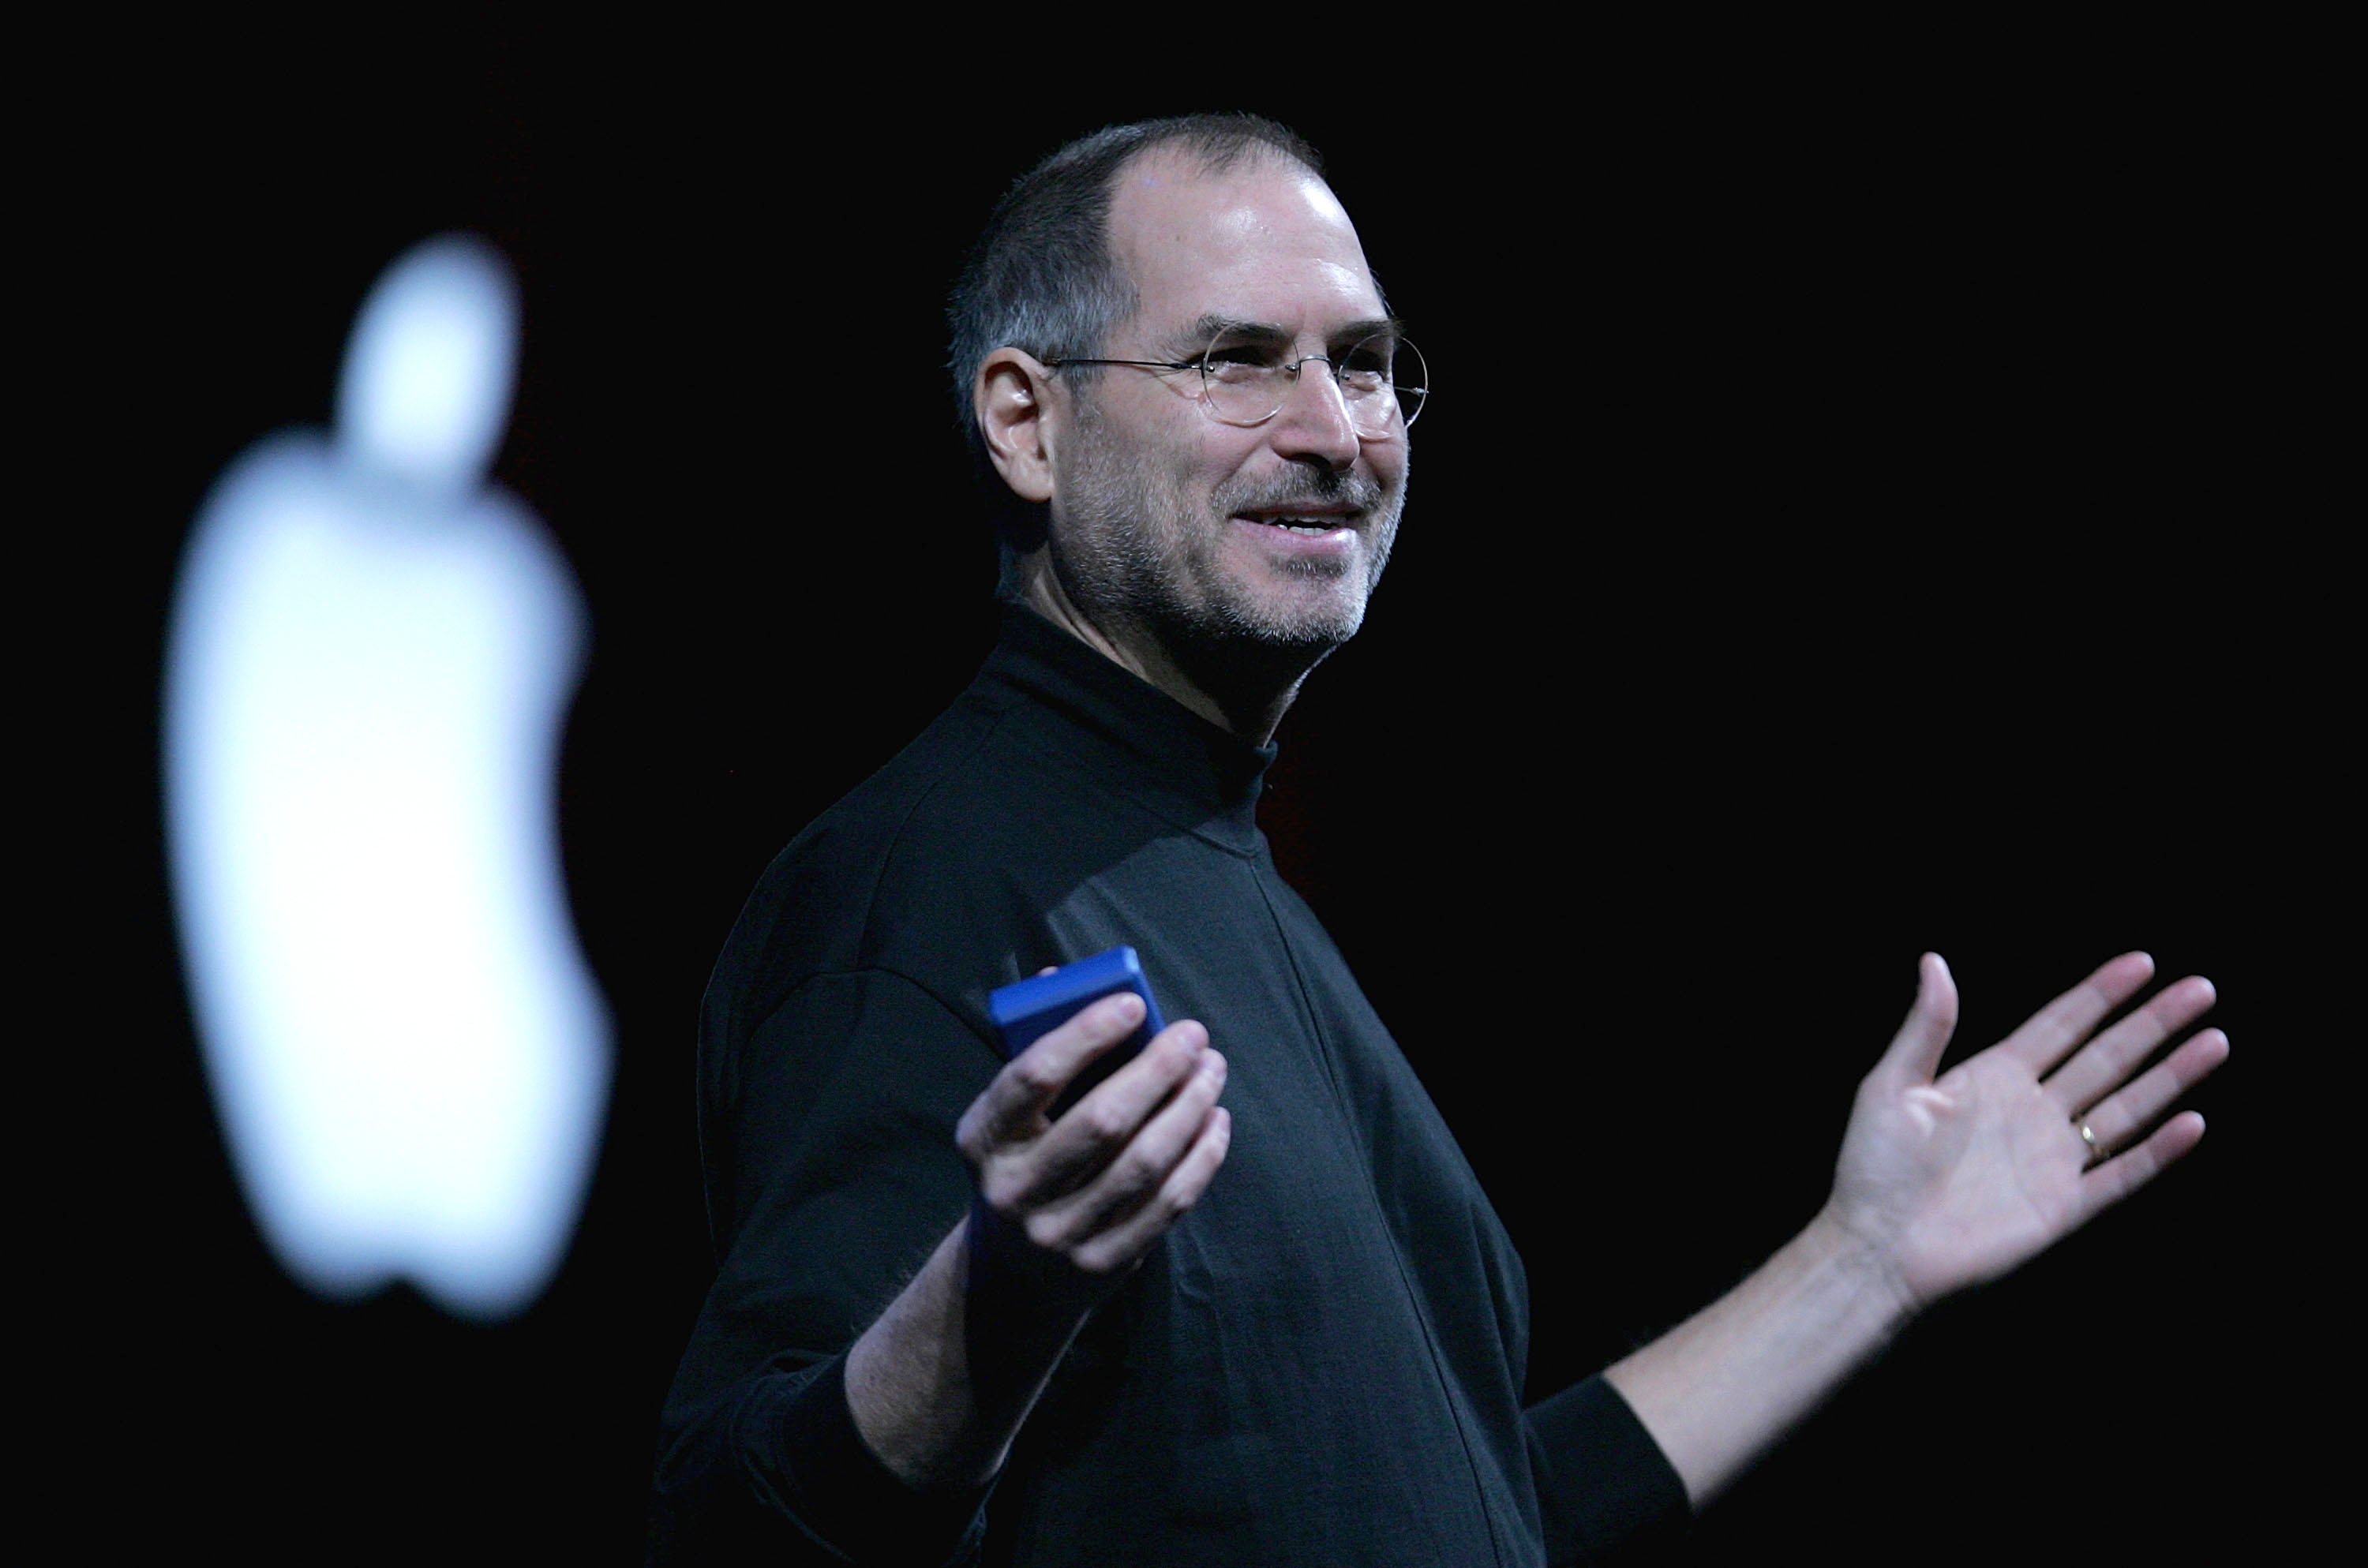 Apple CEO Steve Jobs delivers a keynote address at the 2005 Macworld Expo January 11, 2005 in San Francisco, California. (Justin Sullivan—Getty Images)